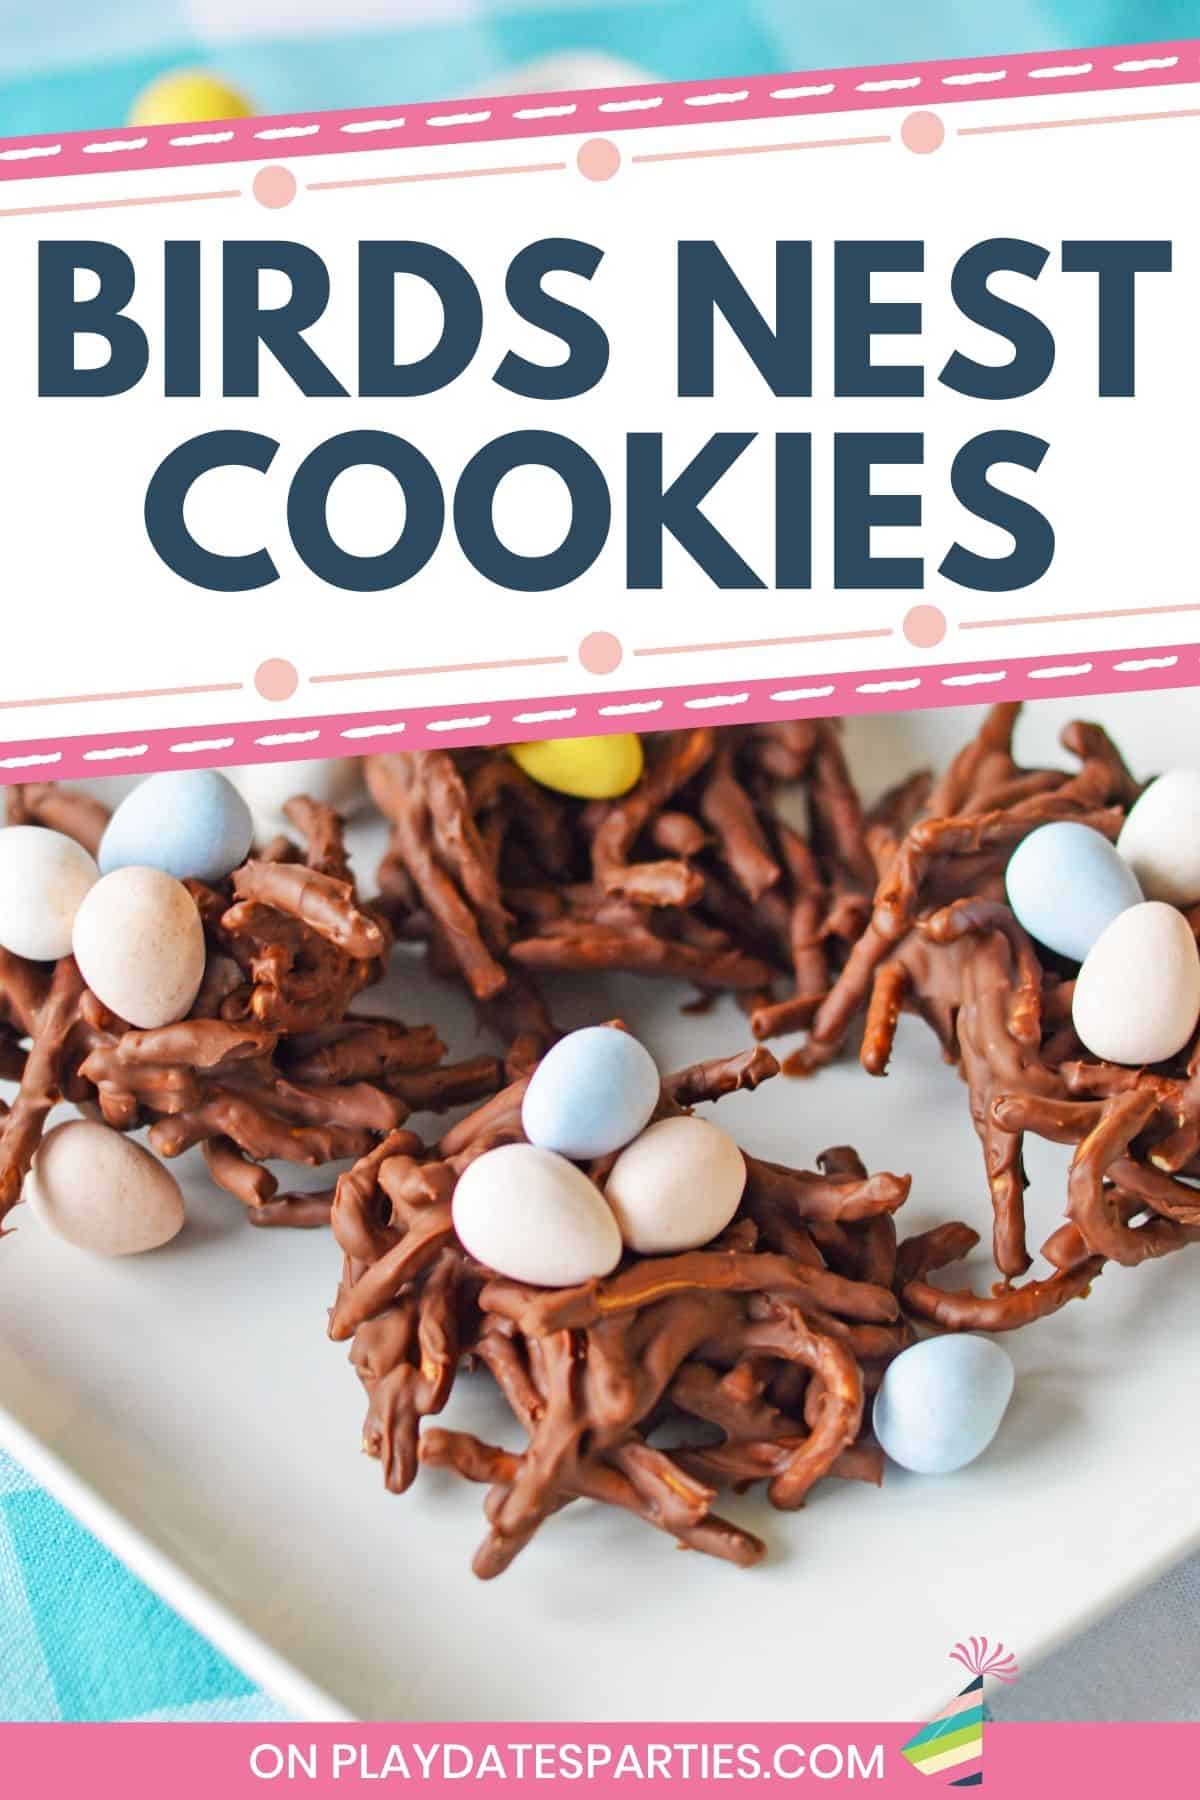 Chocolate chow mein cookies with text overlay birds nest cookies.